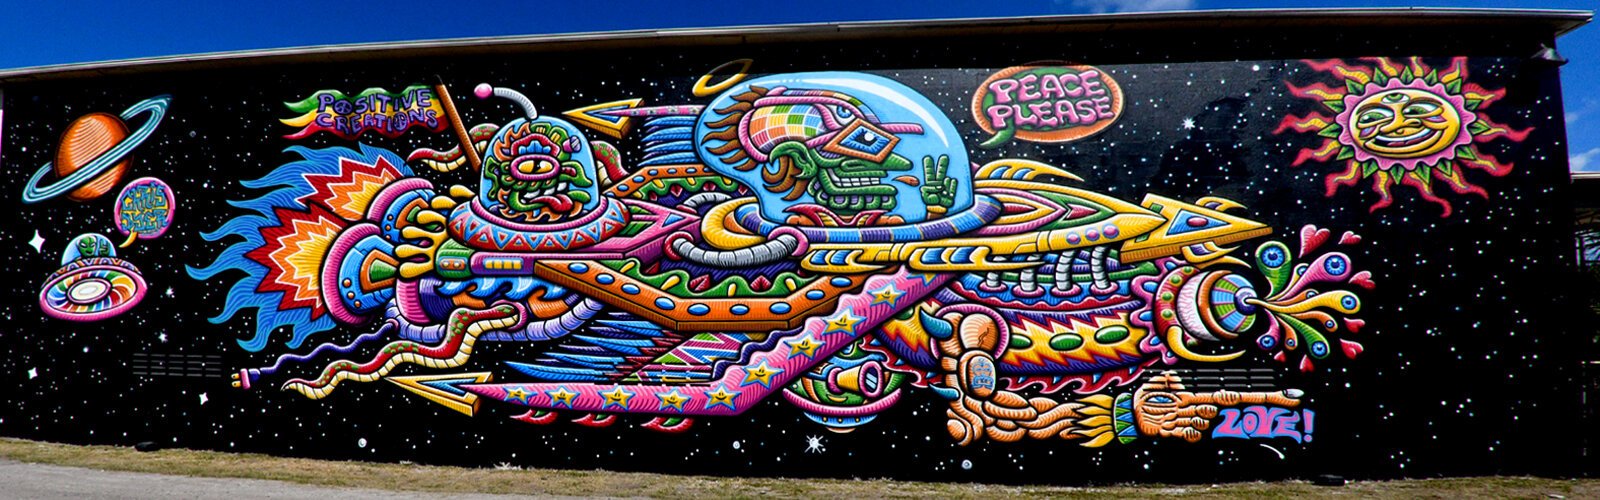 The art of Florida-based Peruvian-Canadian artist Chris Dyer is a reflection of his personal spiritual journey and is part of the 9th SHINE Mural Festival in St Petersburg.